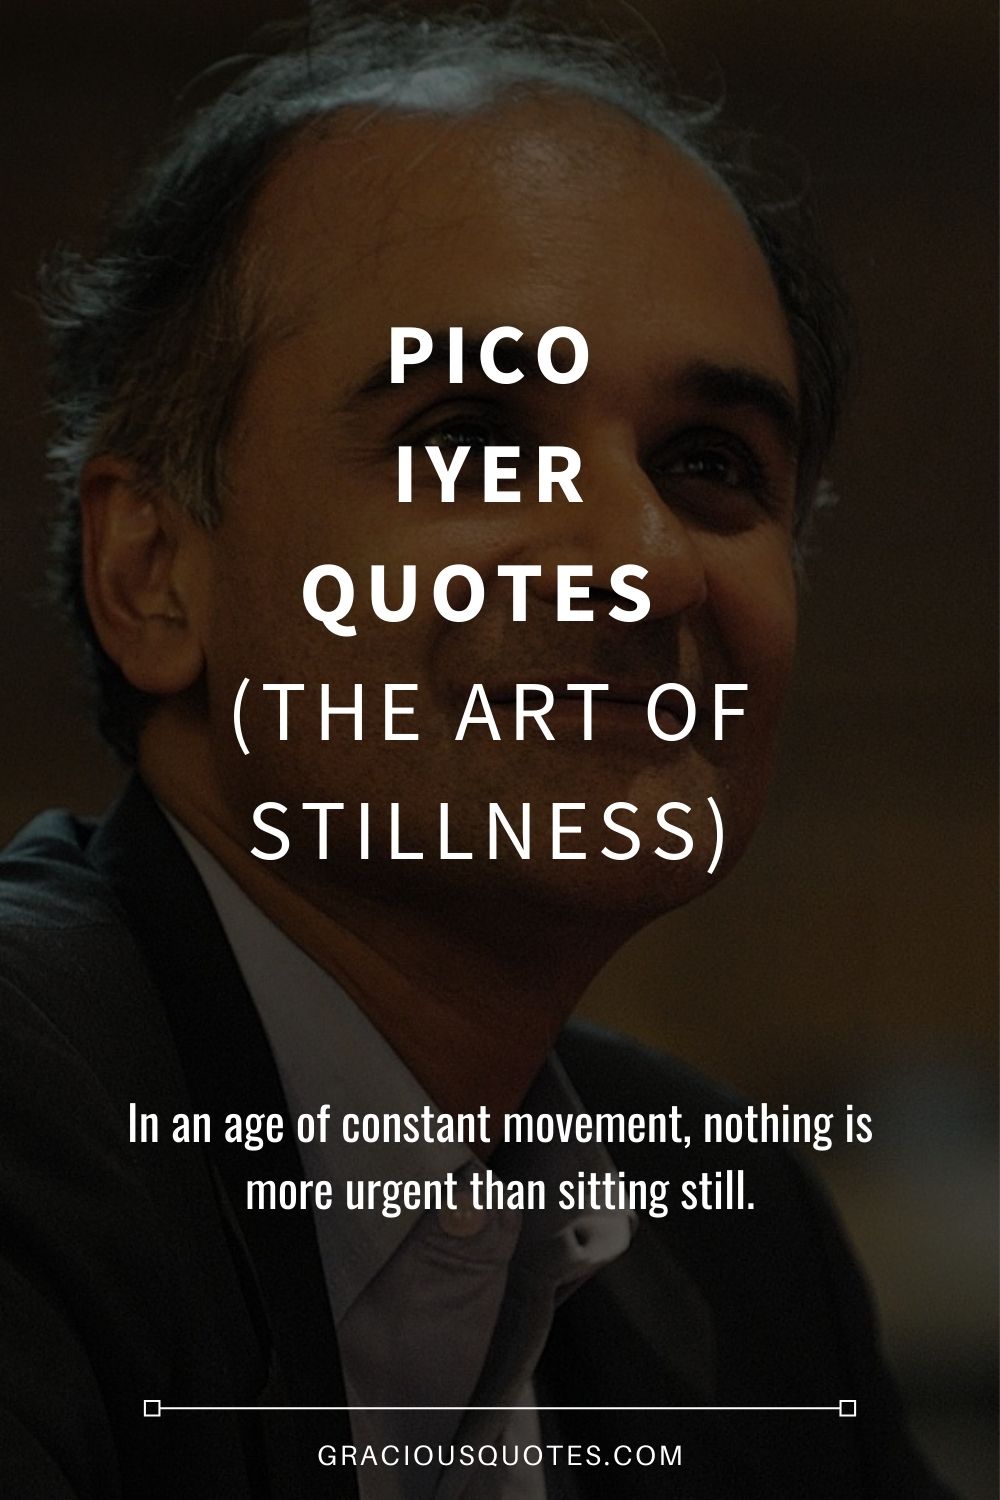 Pico Iyer Quotes (THE ART OF STILLNESS) - Gracious Quotes